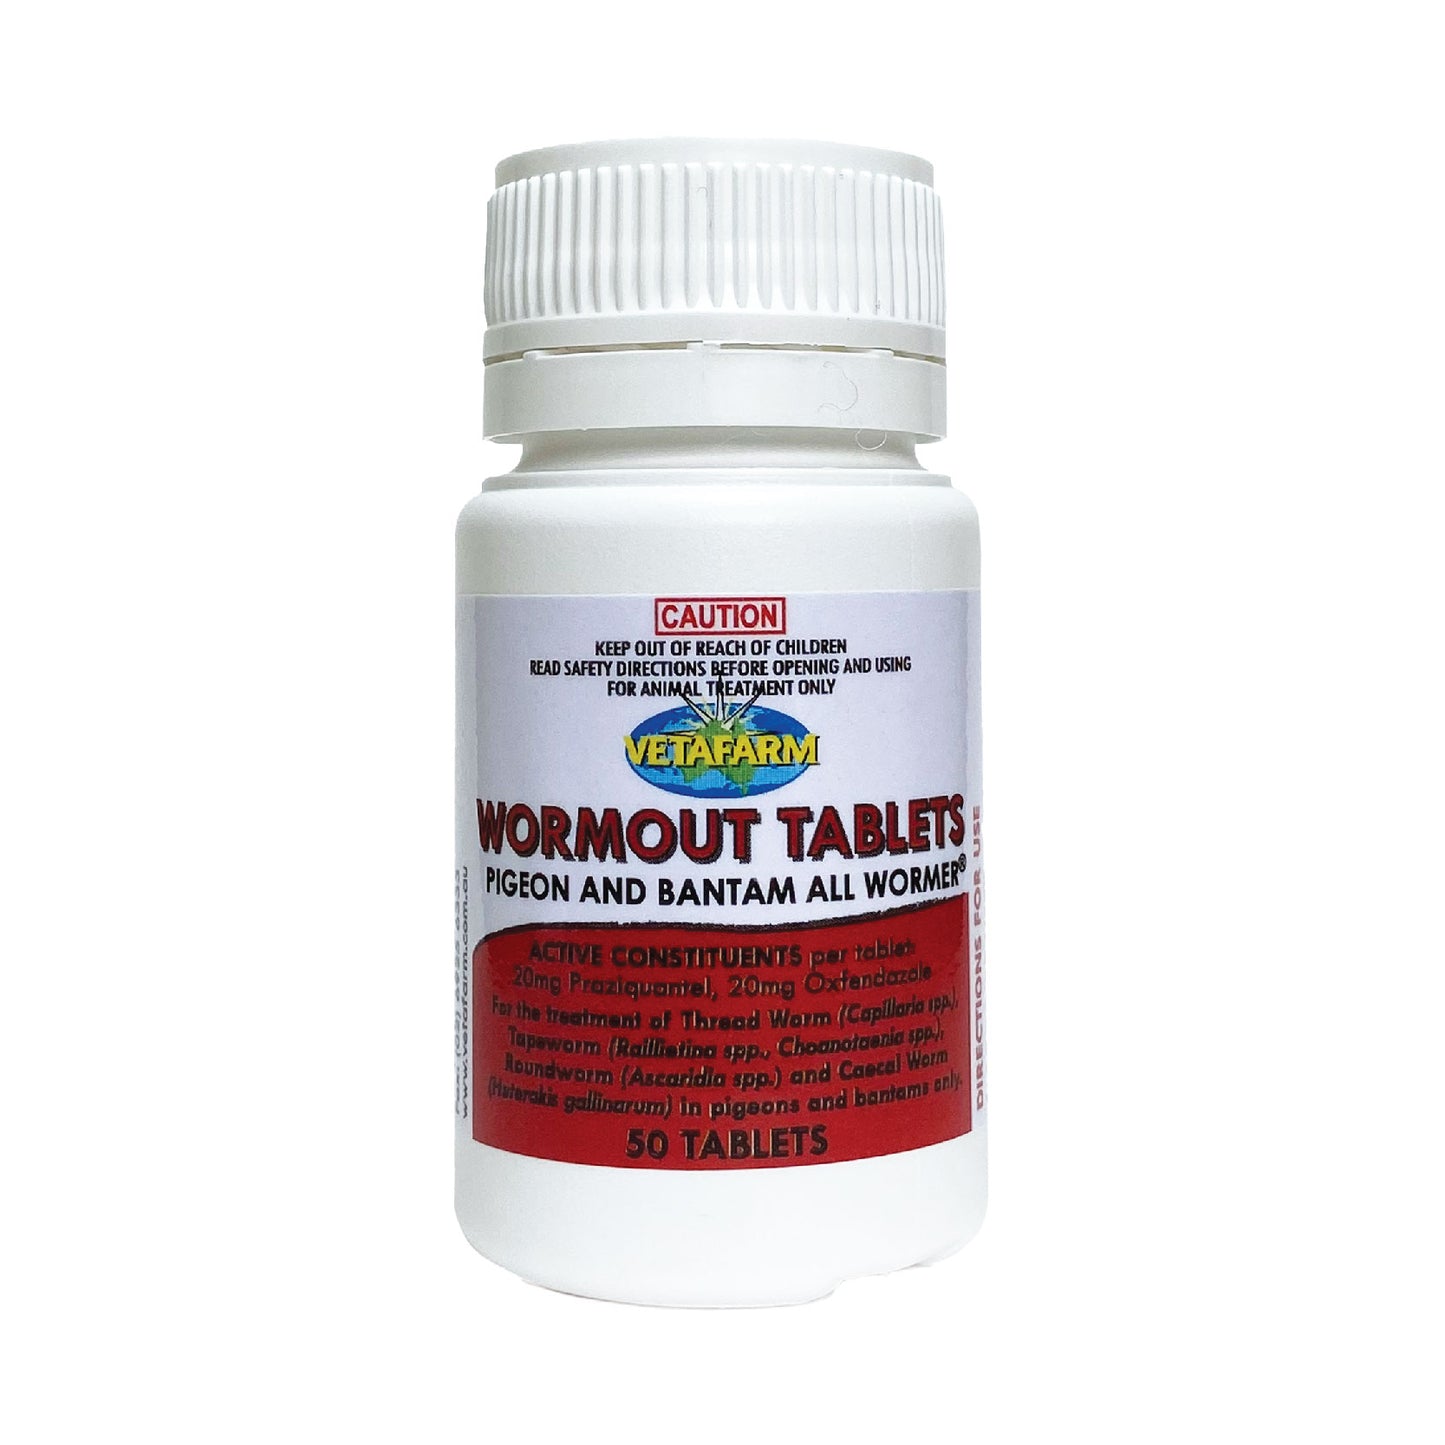 Wormout tablets